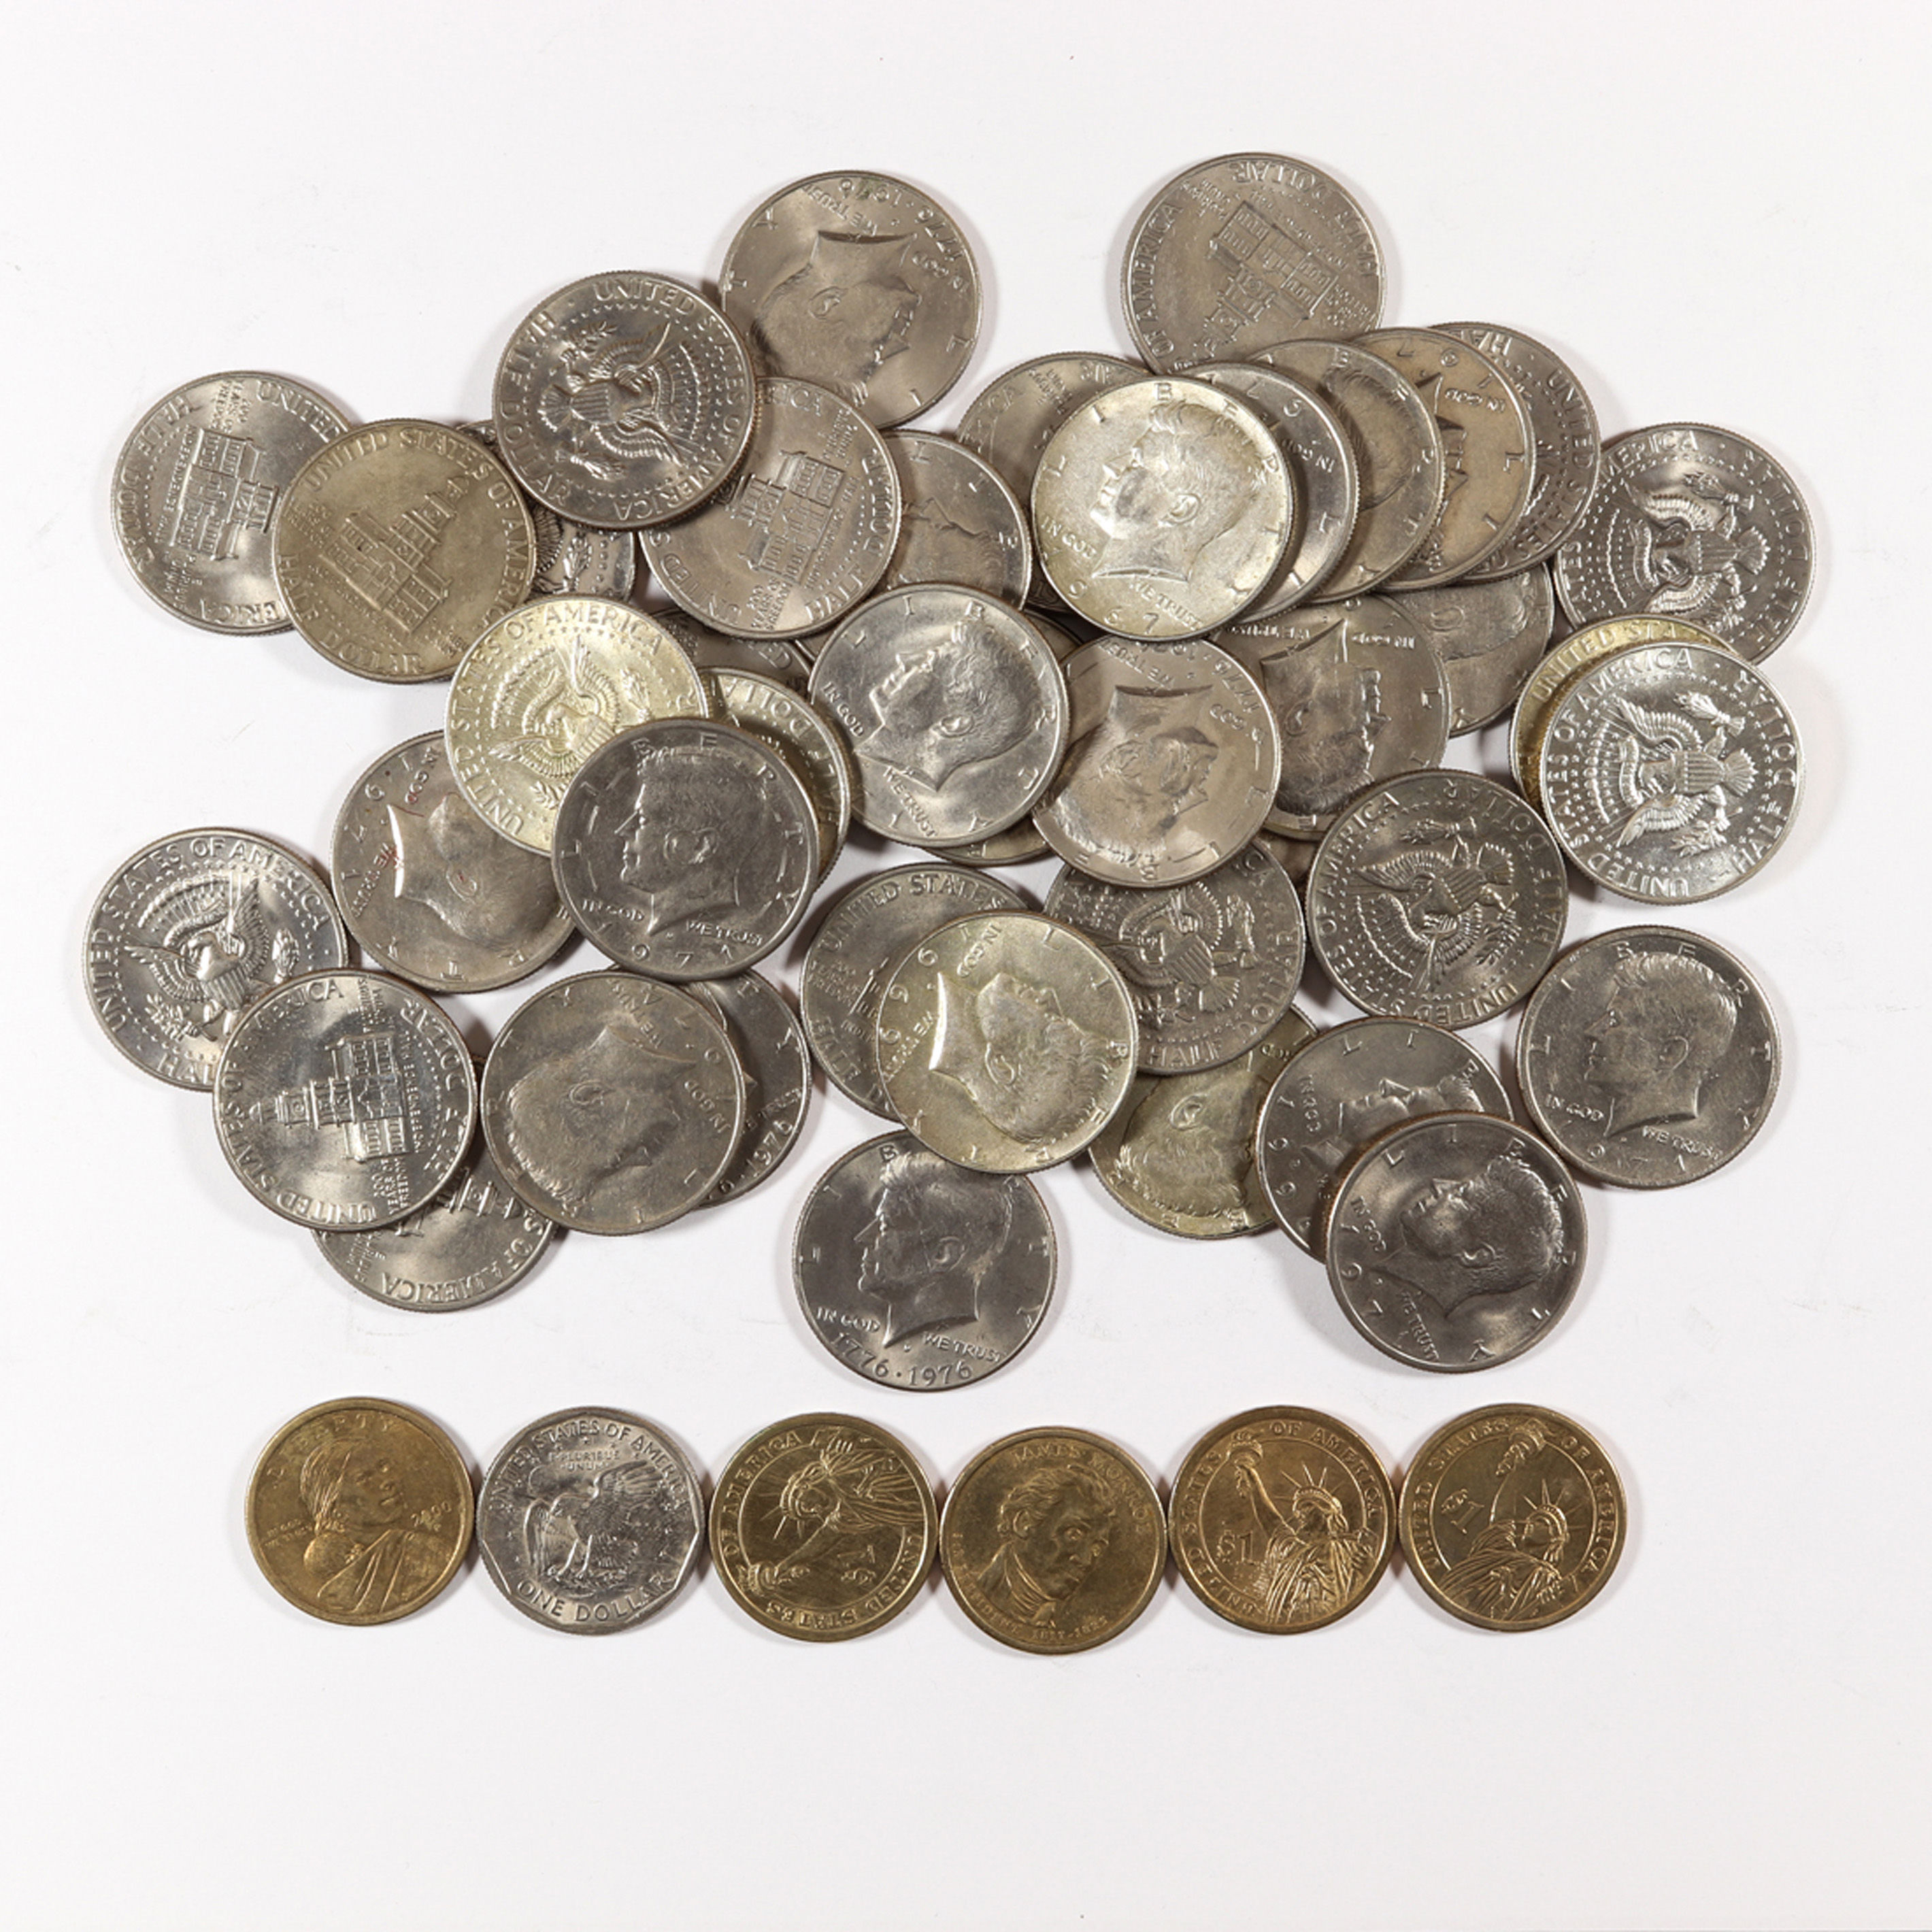  LOT OF 47 COLLECTION OF COINS 3a36d1